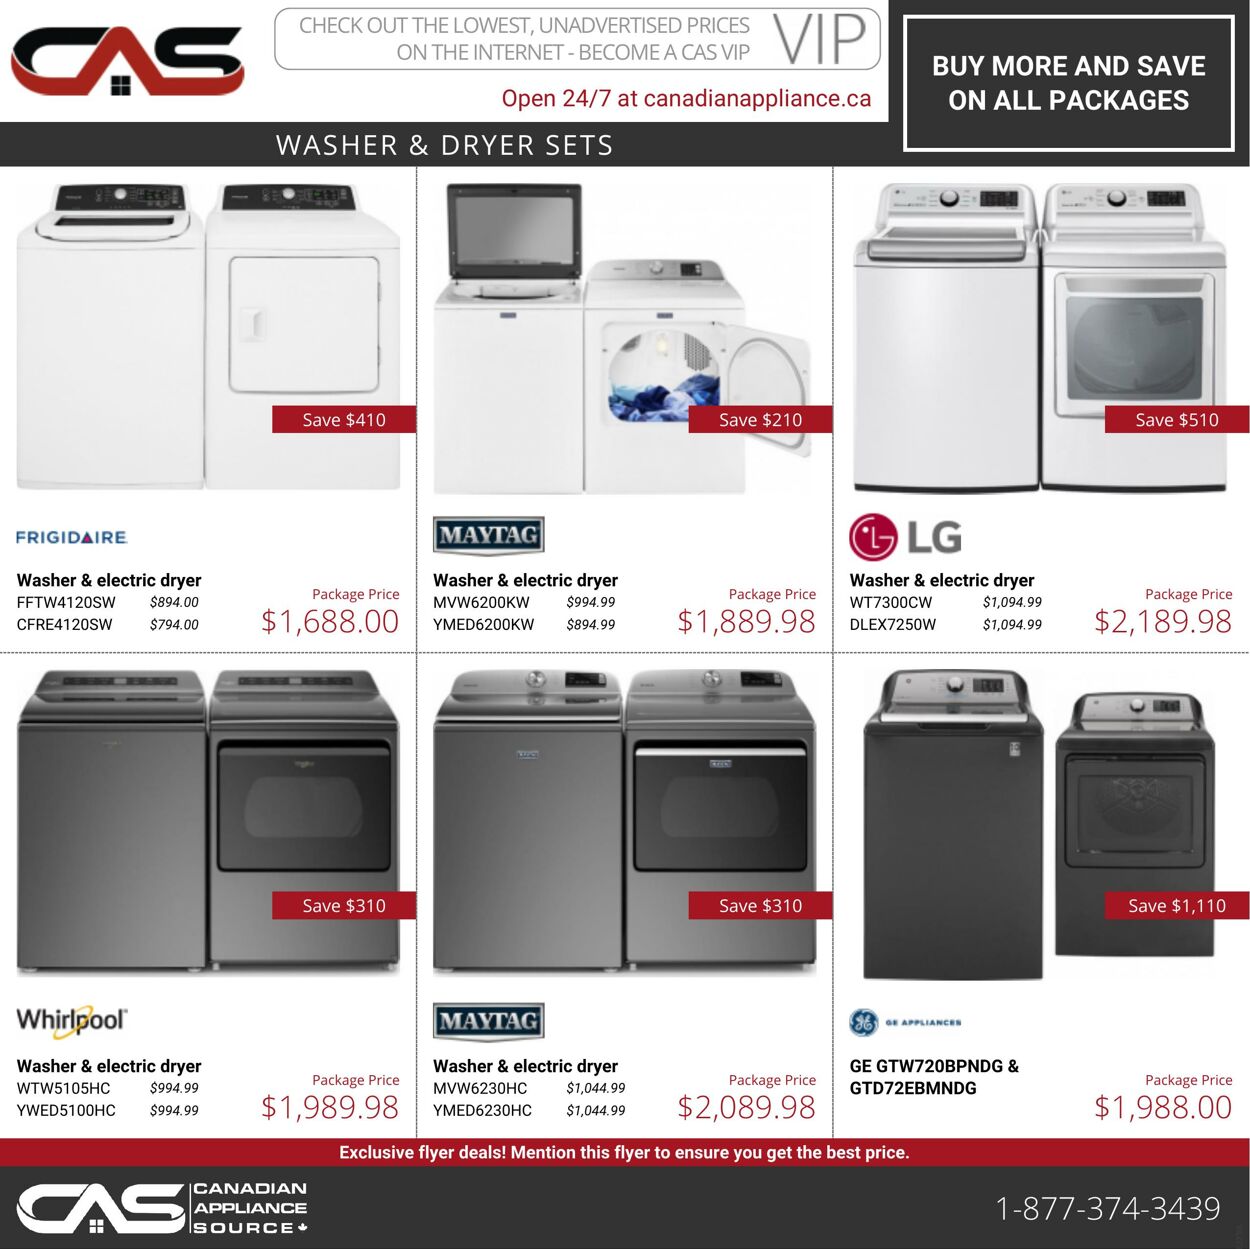 Circulaire Canadian Appliance Source 28.07.2022 - 03.08.2022